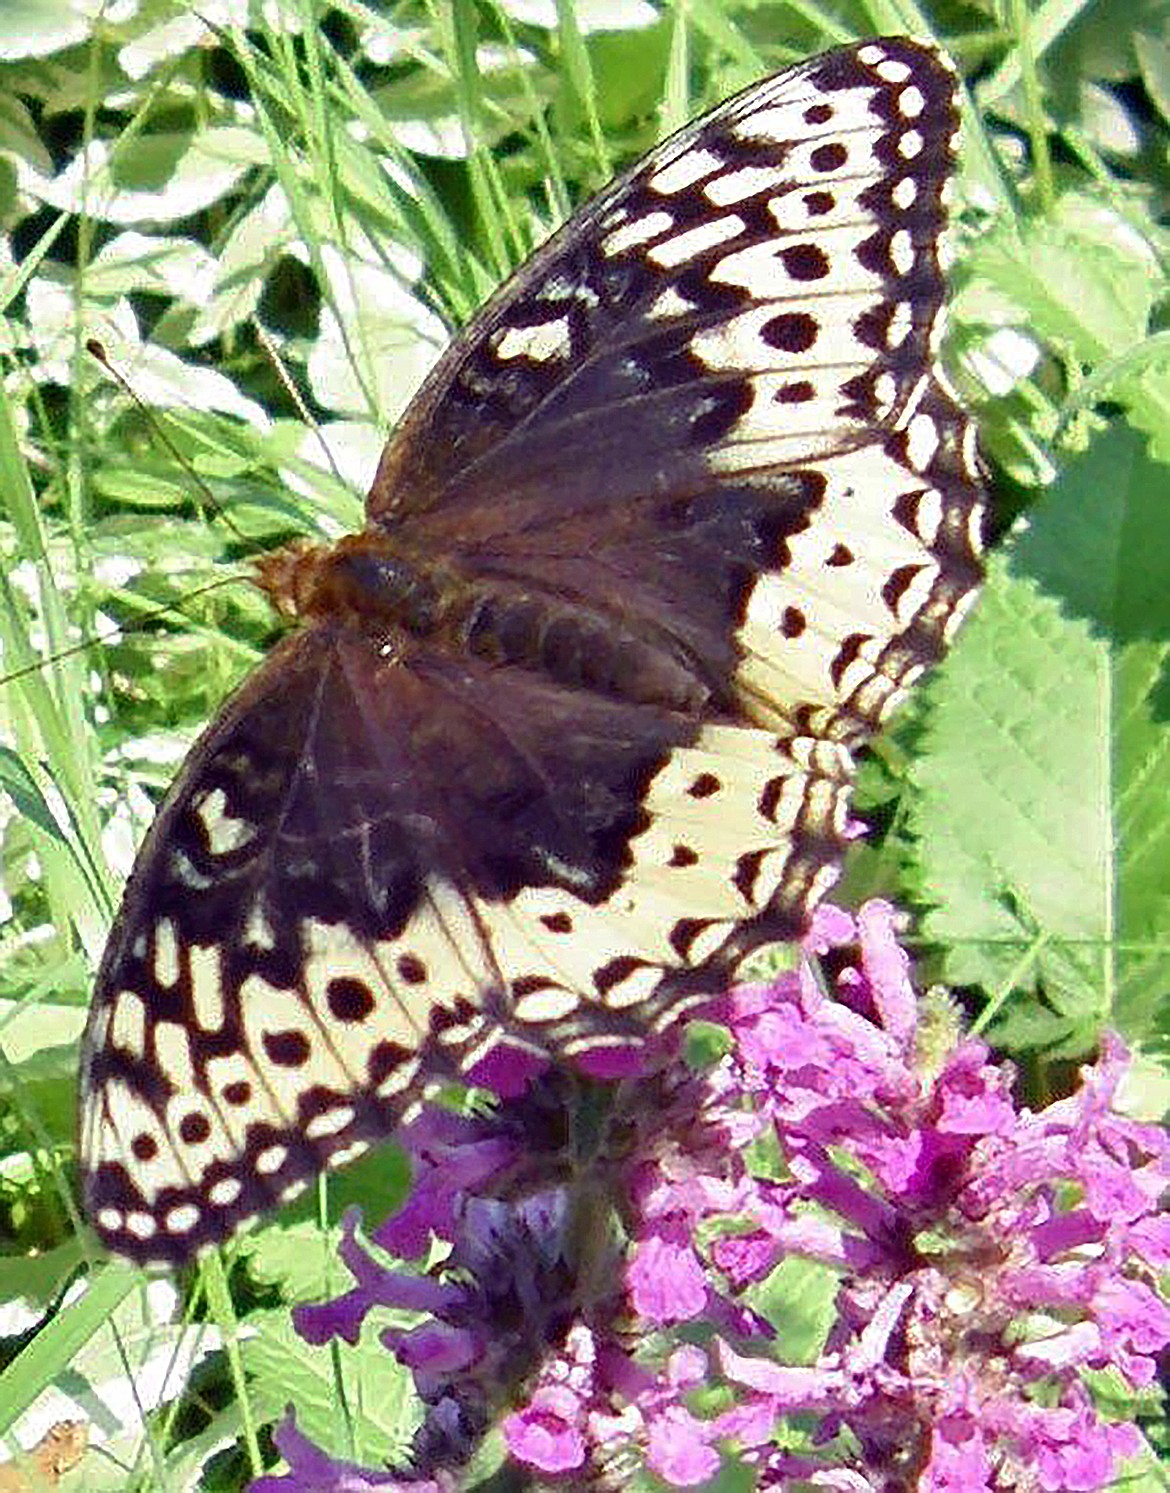 Butterflies love flowers and often cover the blossoms on summer days.